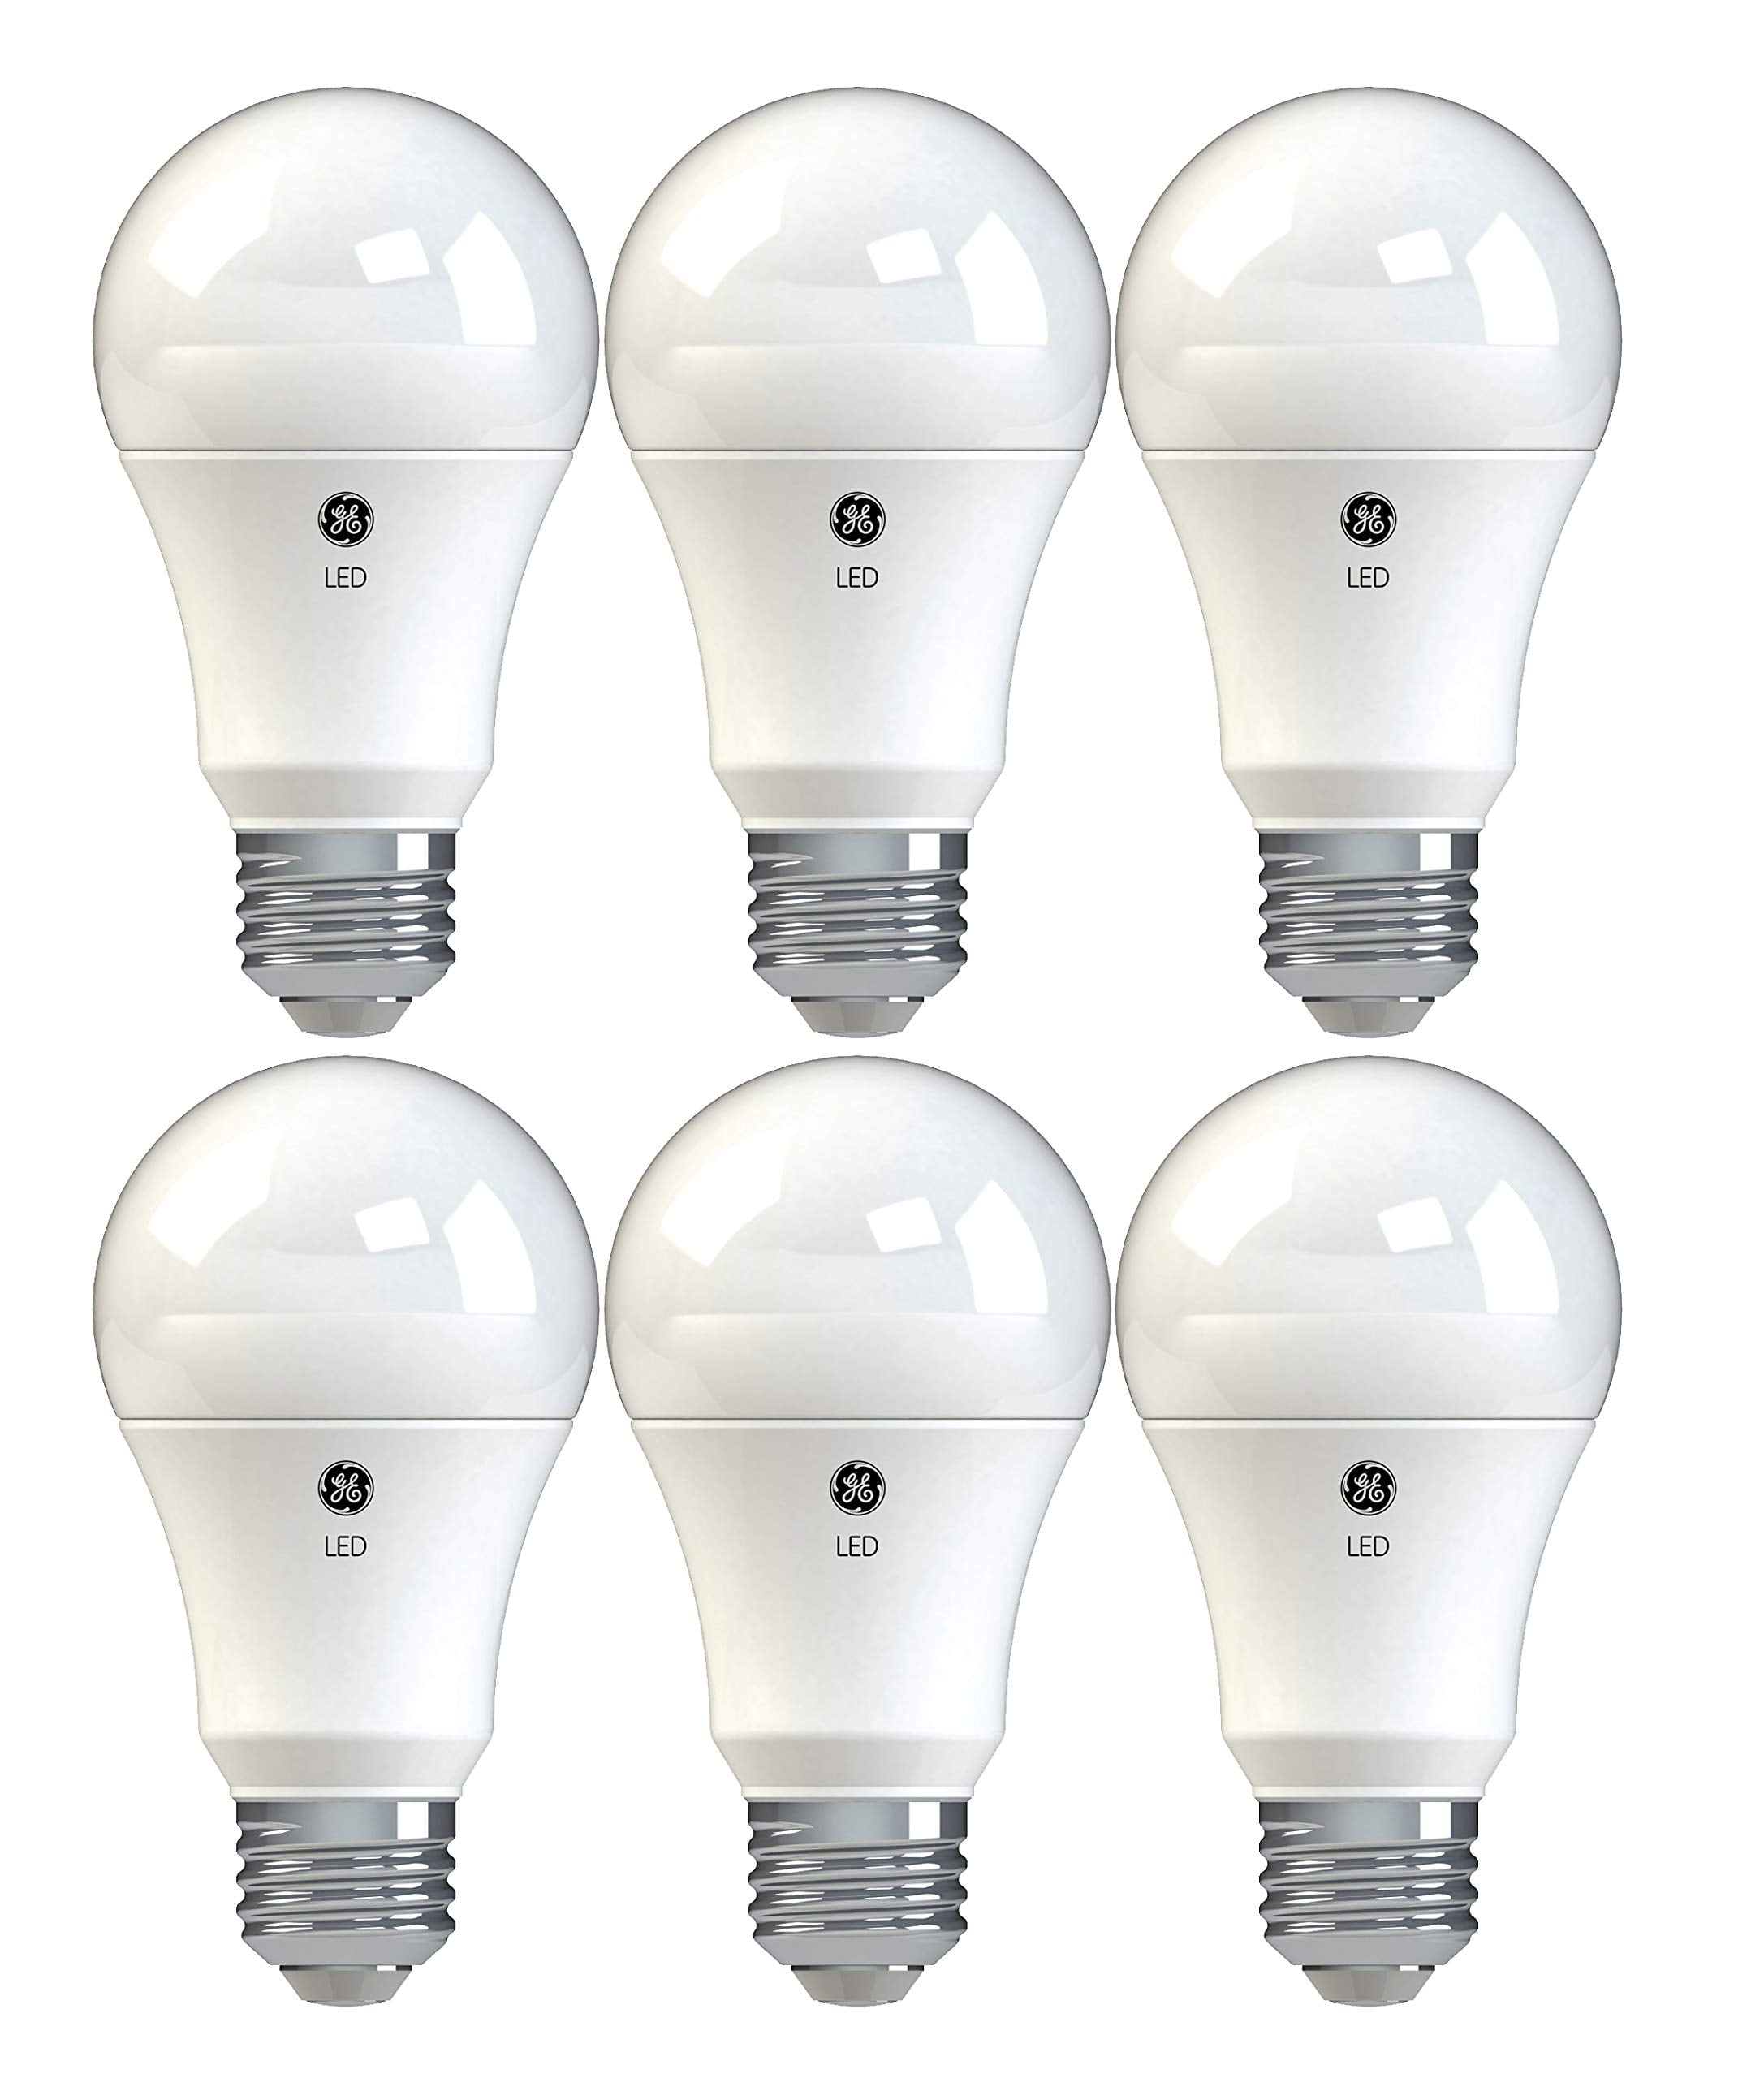 GE Lighting 99215 Dimmable Bulbs 10 (60-Watt-Replacement), 800-Lumen, Medium Base A19 General Purpose LED, 6-Pack, Soft White, 6 Count